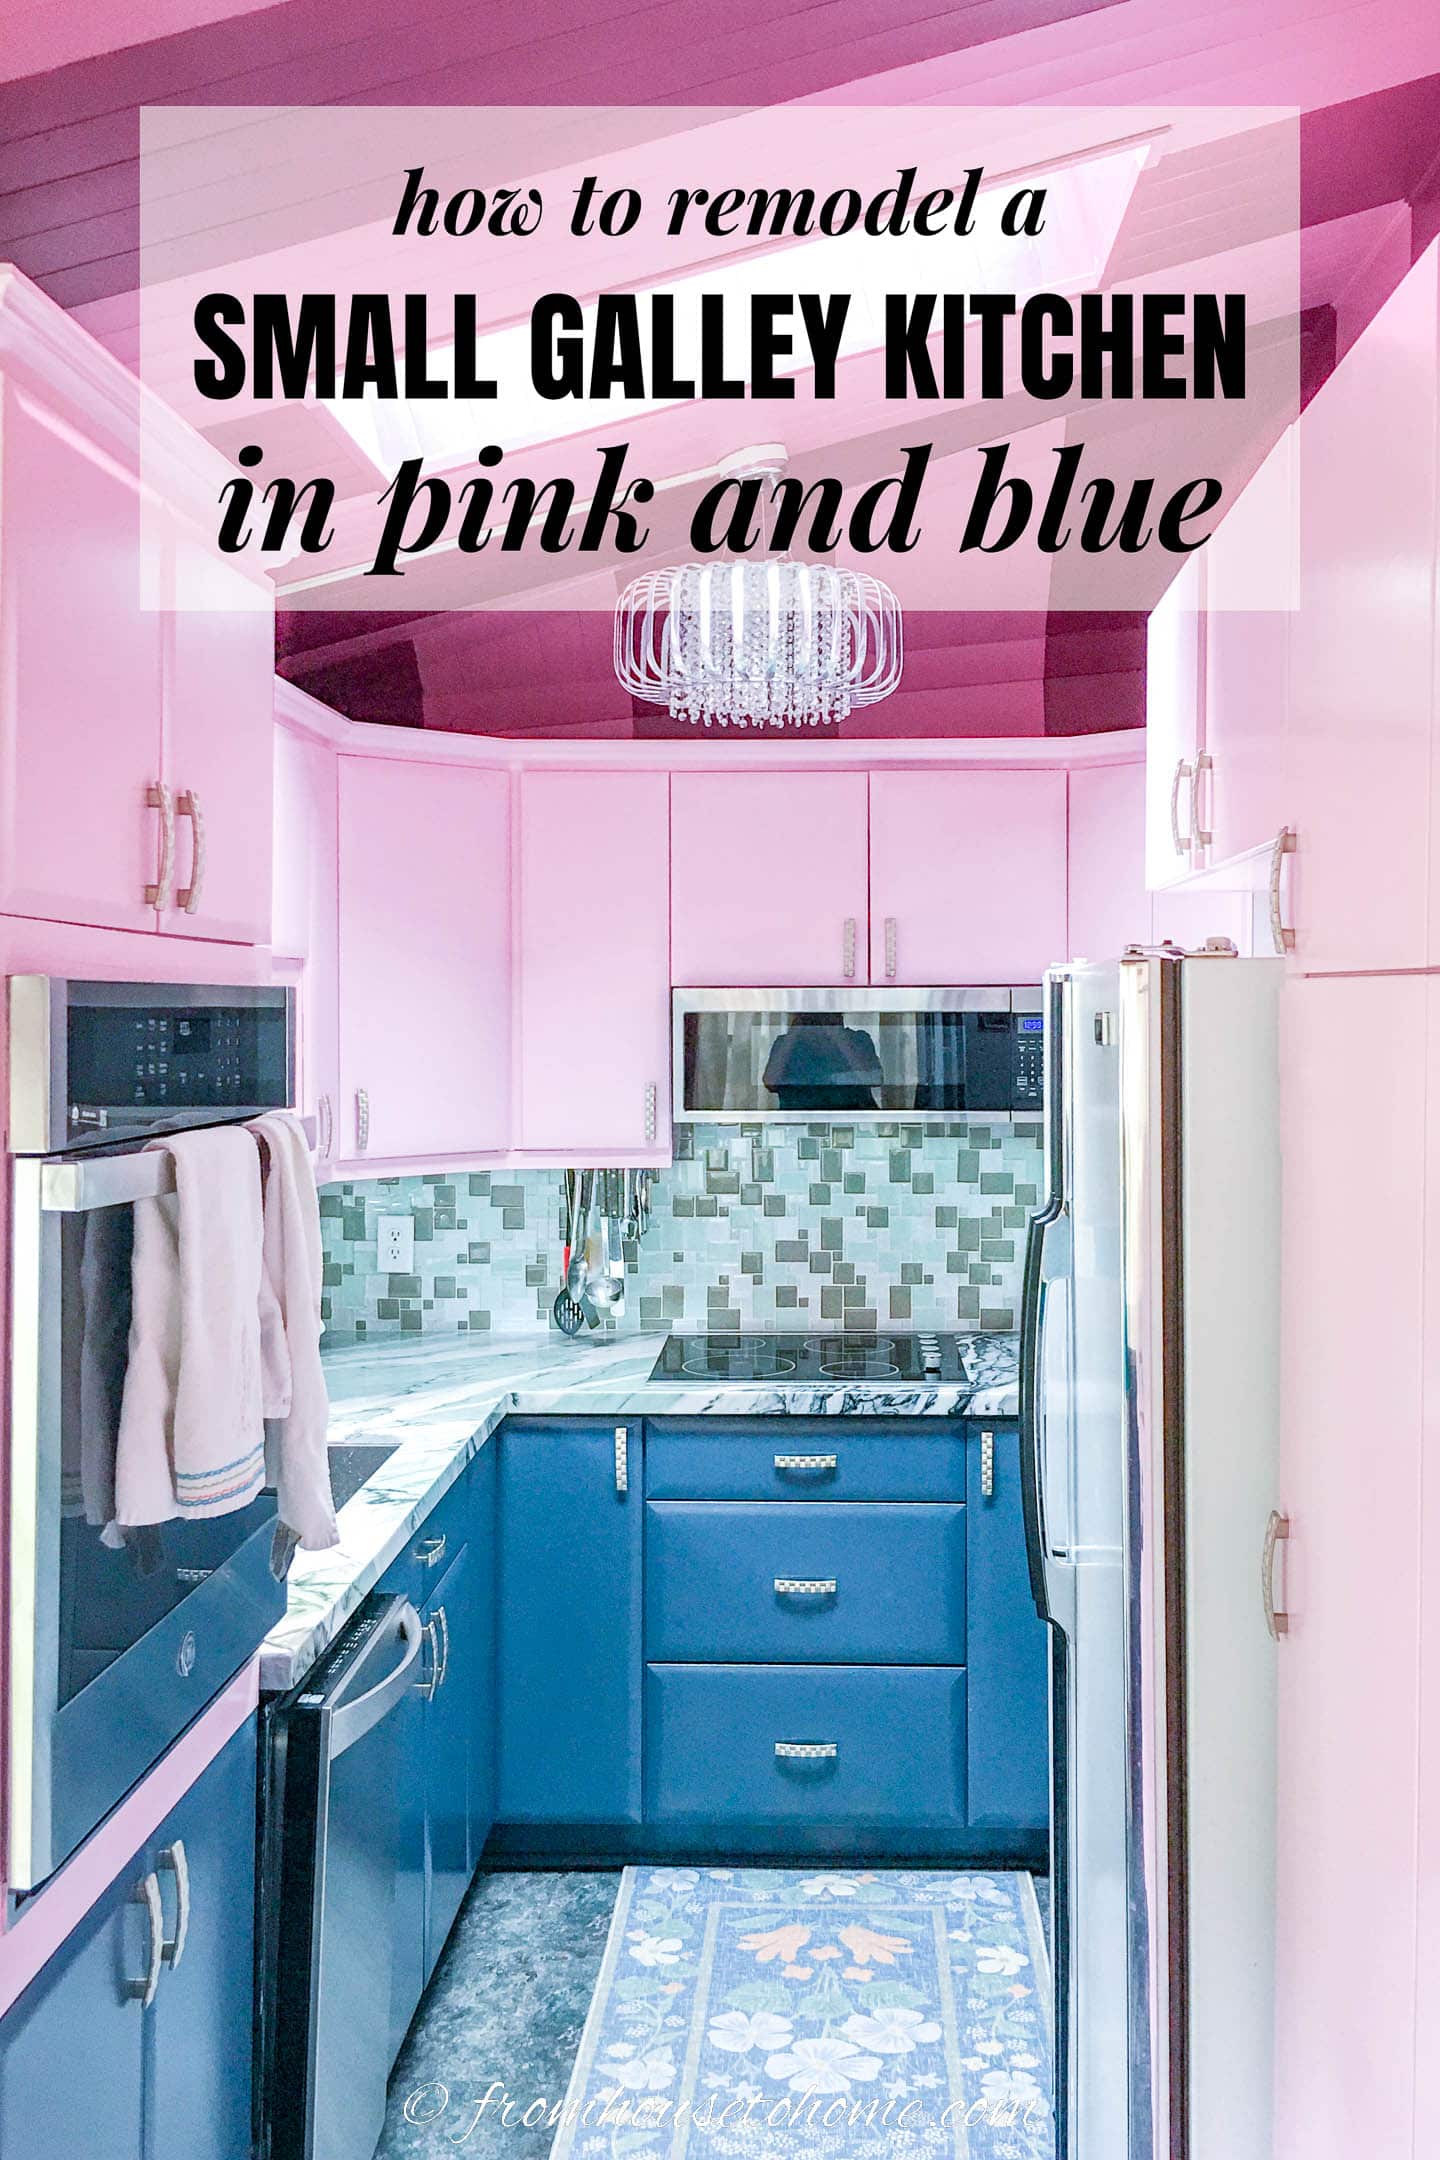 how to remodel a small galley kitchen in pink and blue